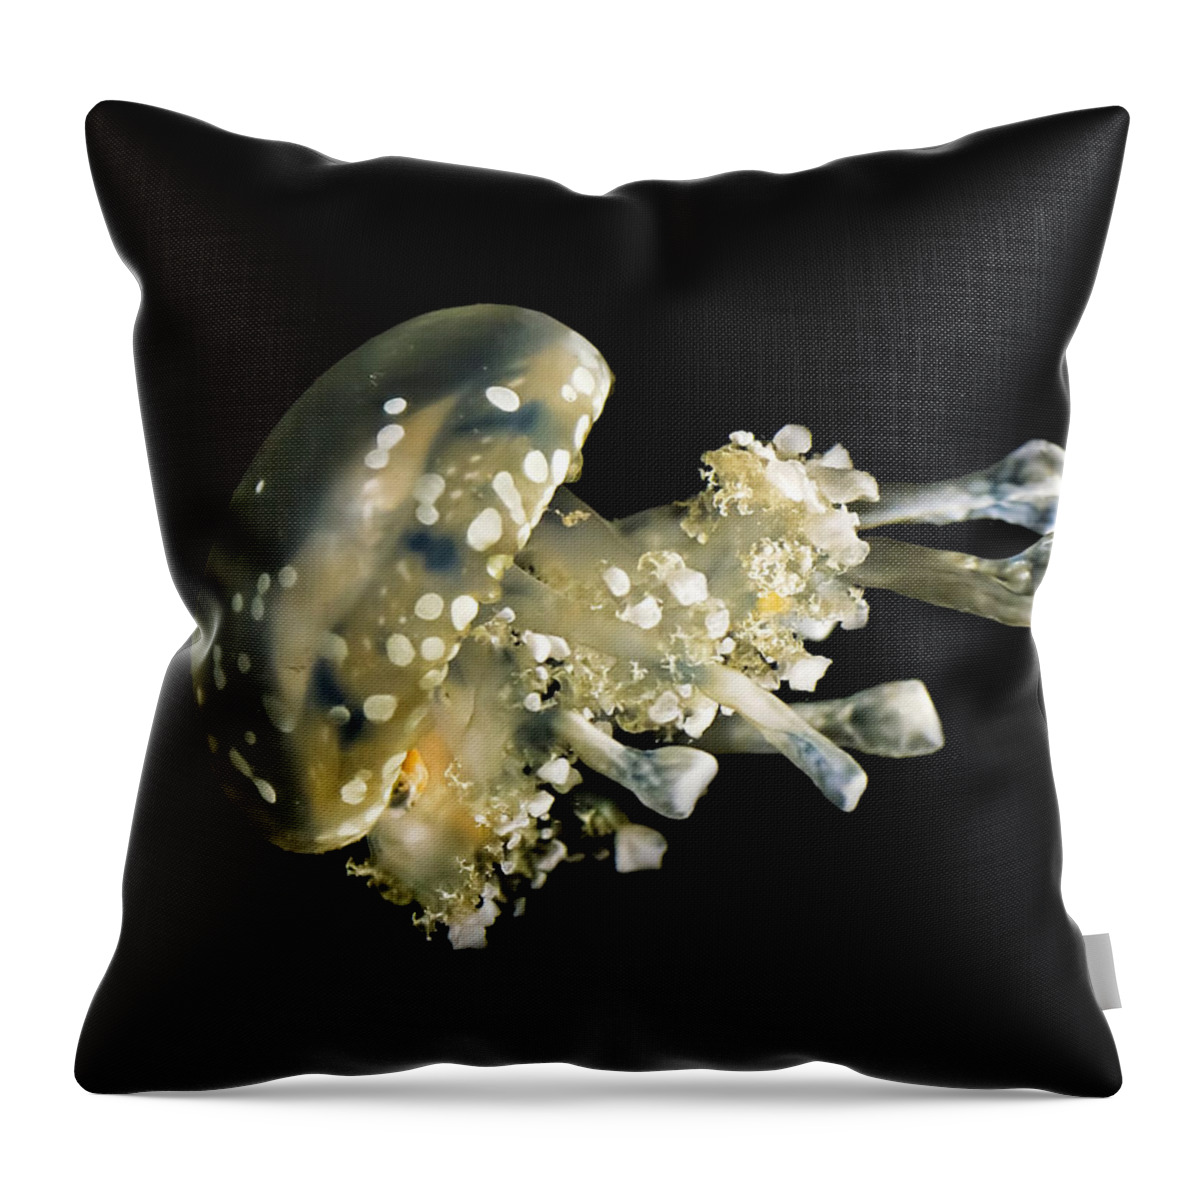 Spotted Jelly Throw Pillow featuring the photograph Spotted Lagoon Jellyfish by Heather Applegate